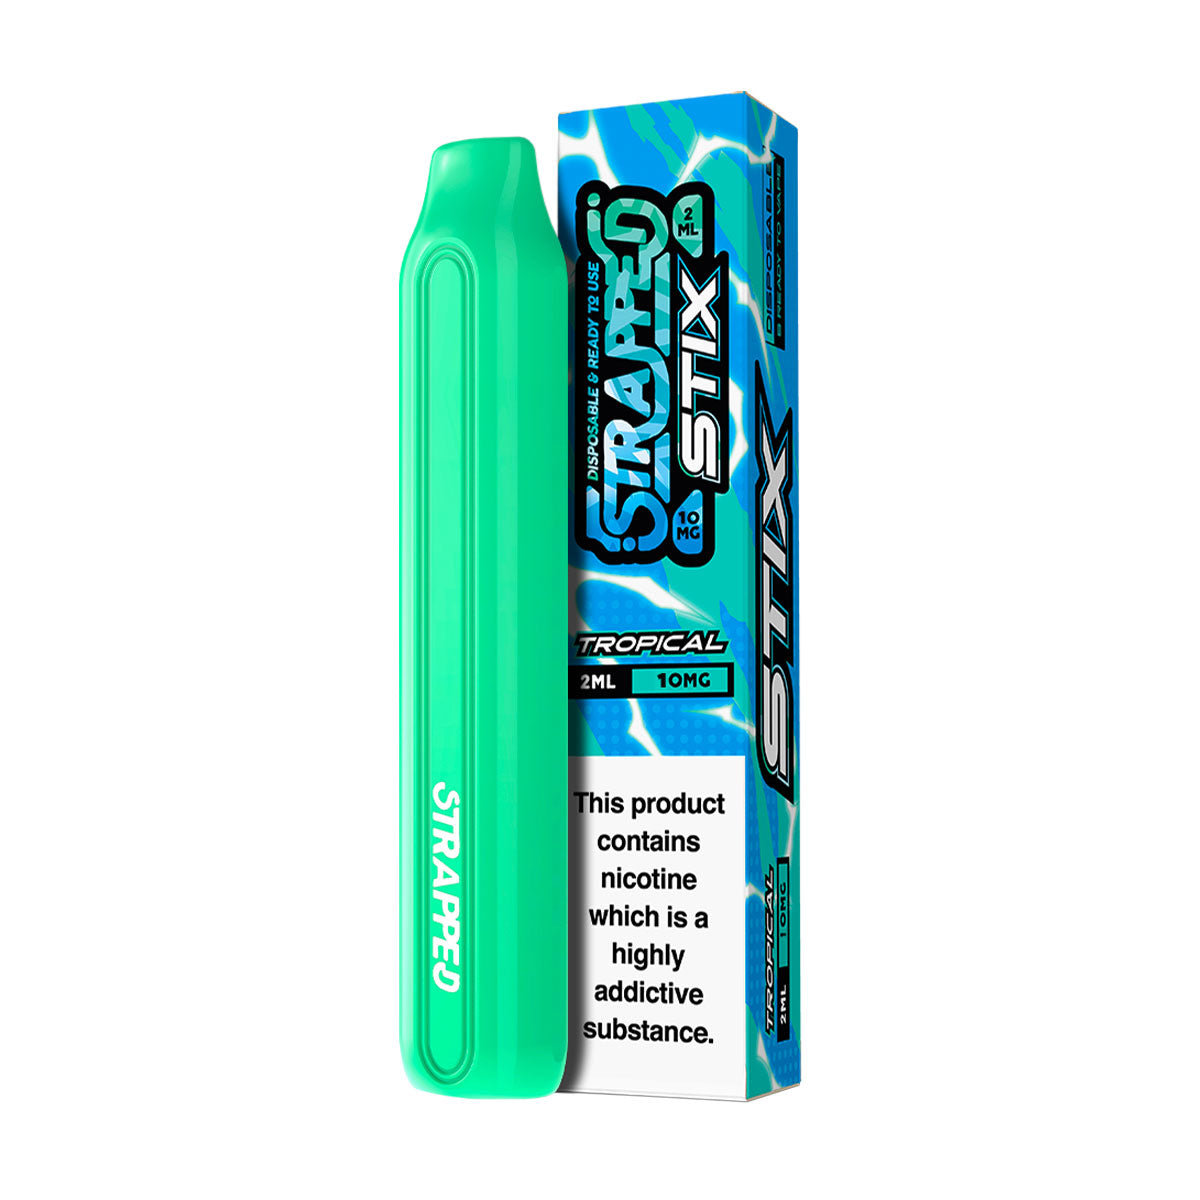 The Strapped Stix Tropical flavoured disposable vape has a tantalisingly tasty mix of tropical flavours which will place you firmly on the beach at the height of summer.